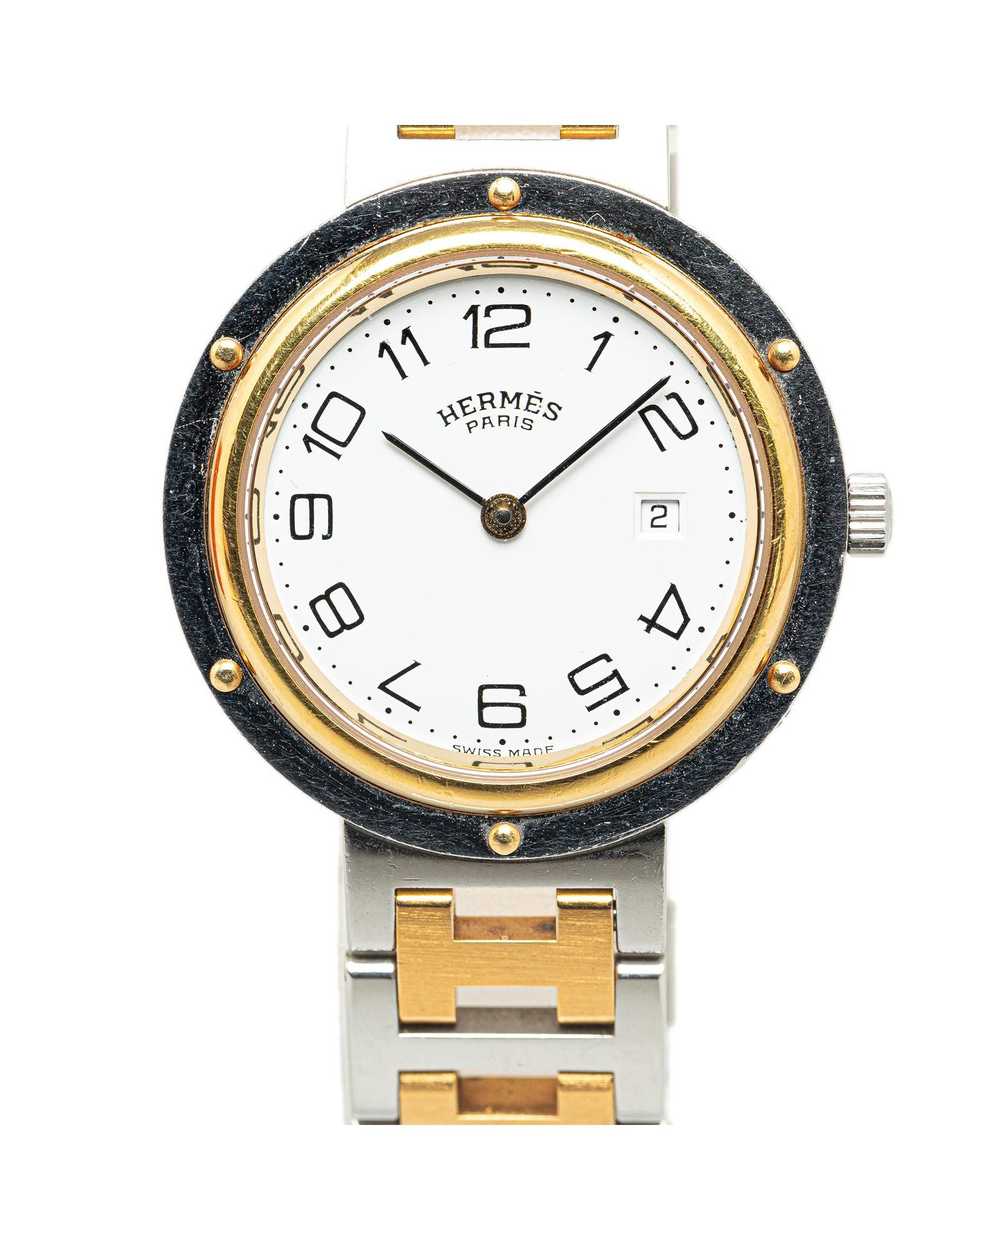 Hermes Stainless Steel Quartz Clipper Watch - image 3